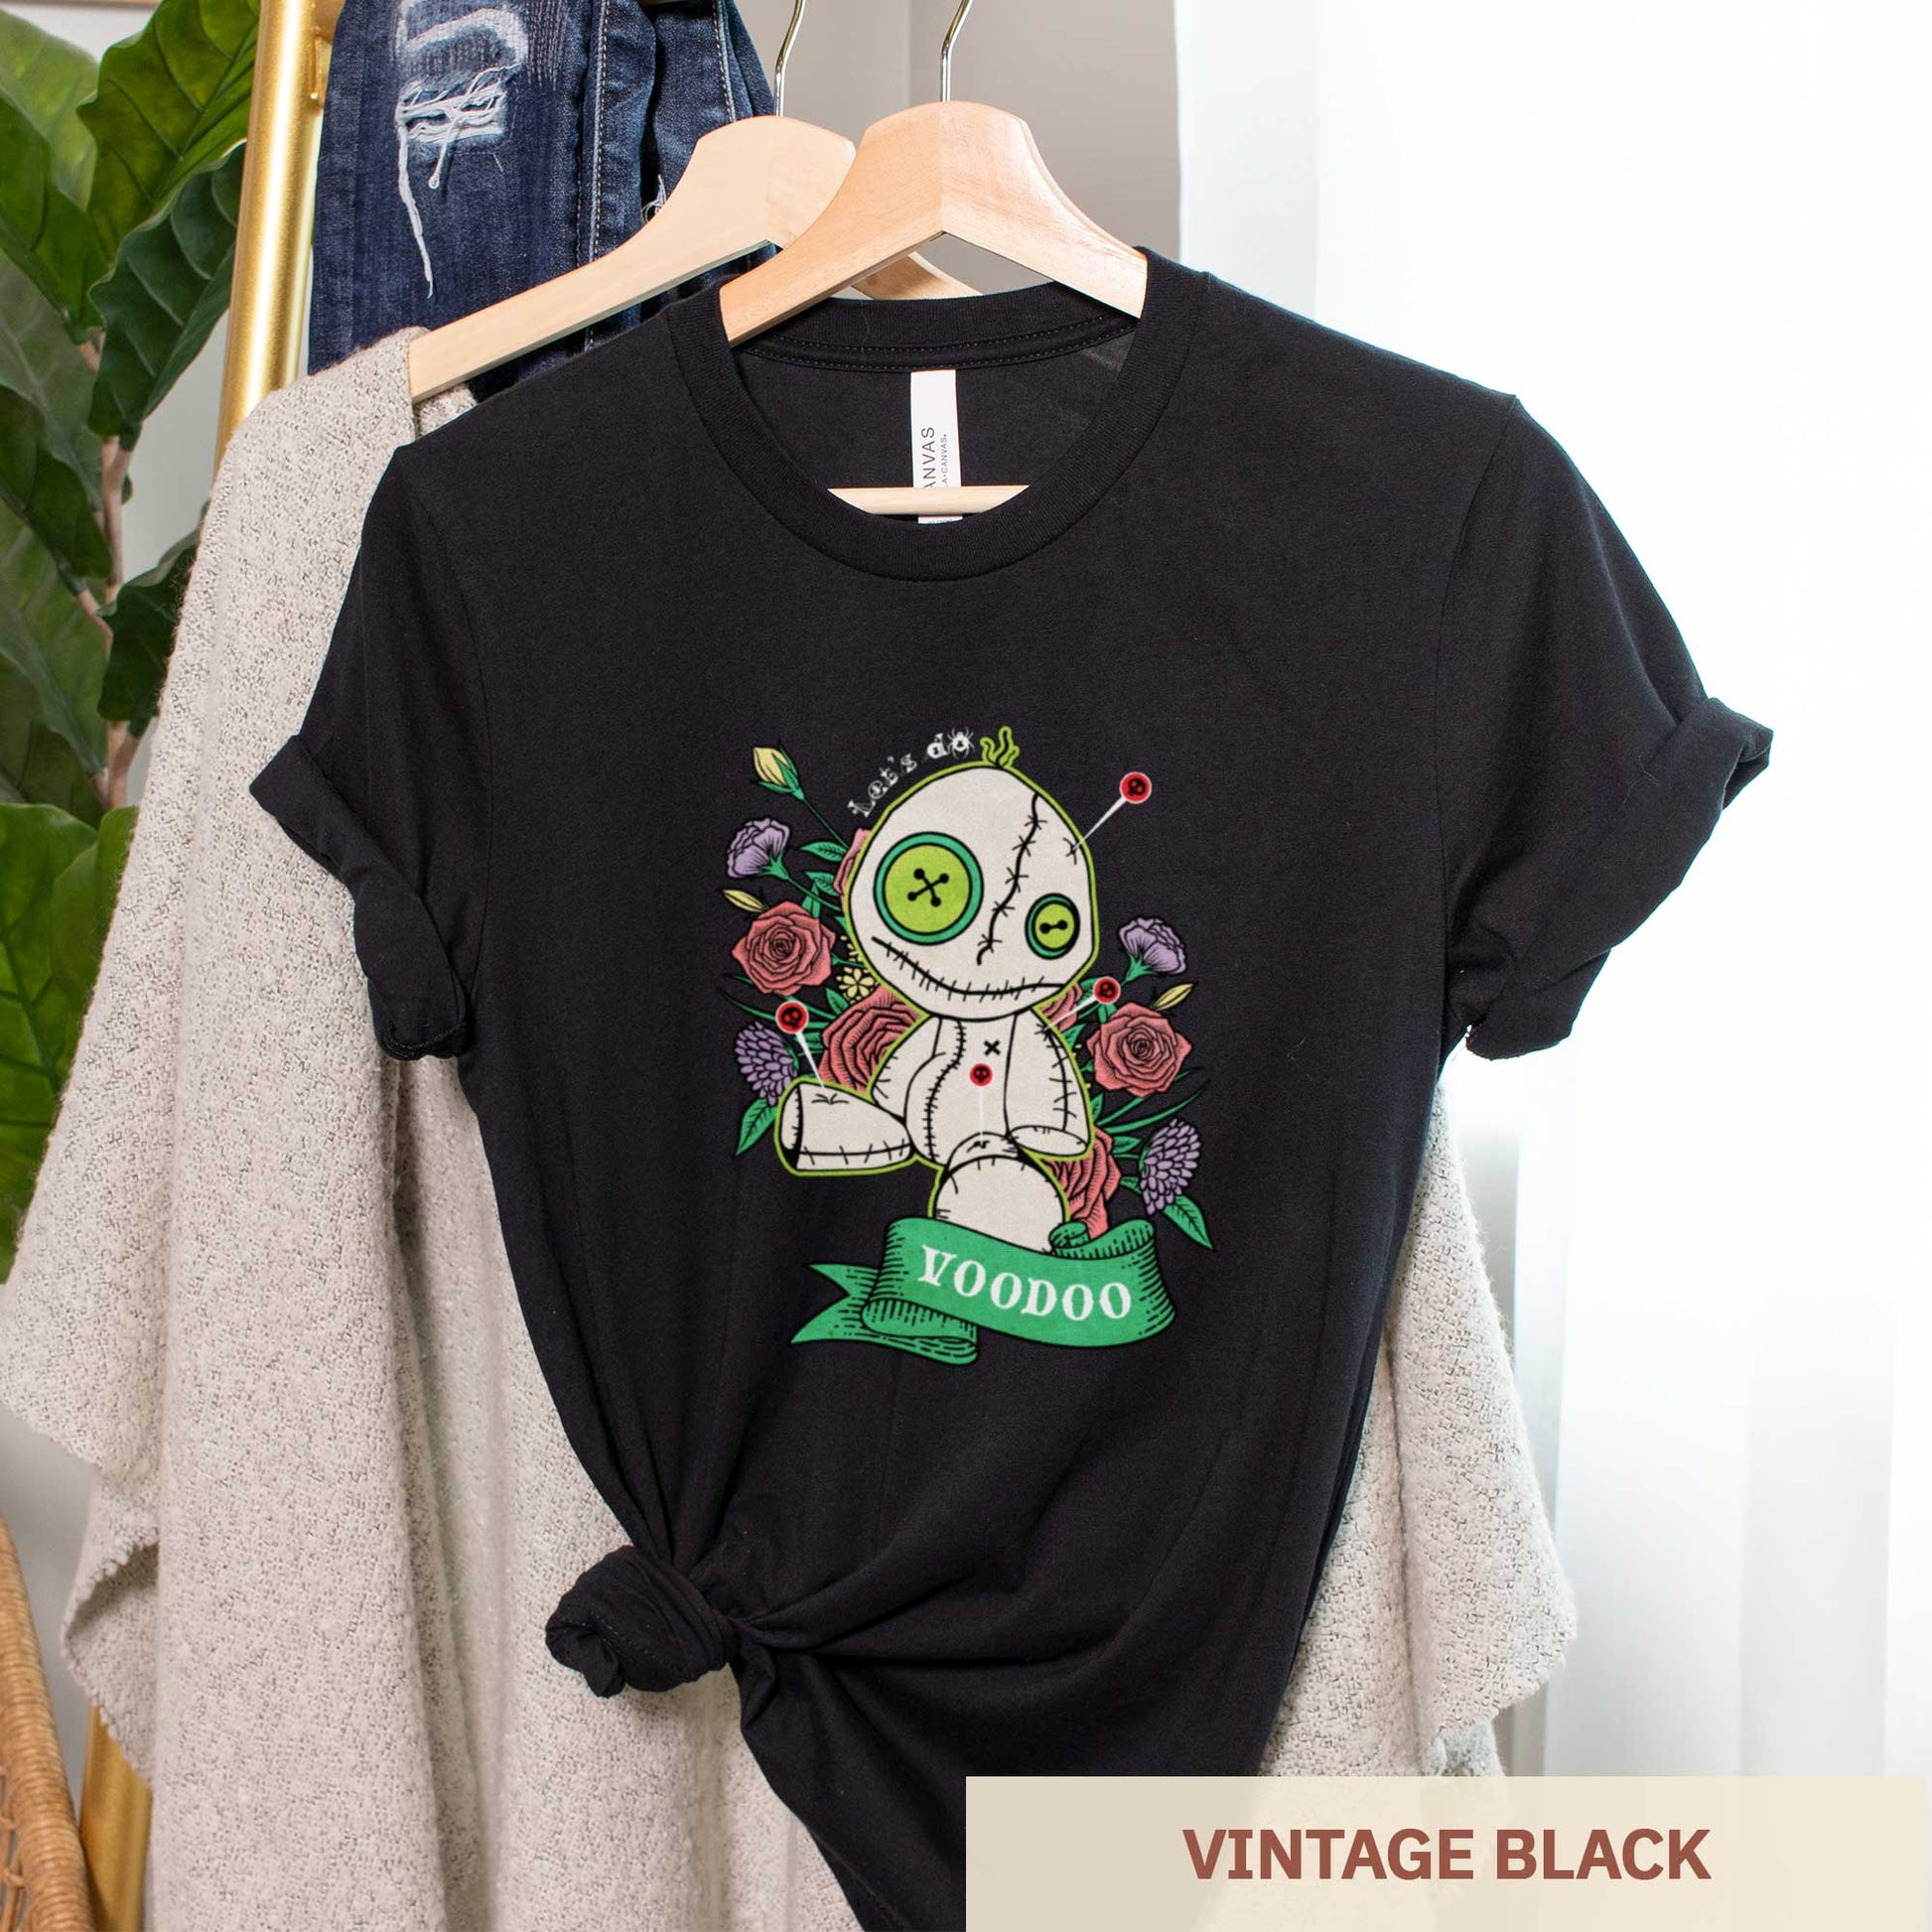 A vintage black heather Bella Canvas t-shirt featuring a cartoon voodoo doll and flowers.